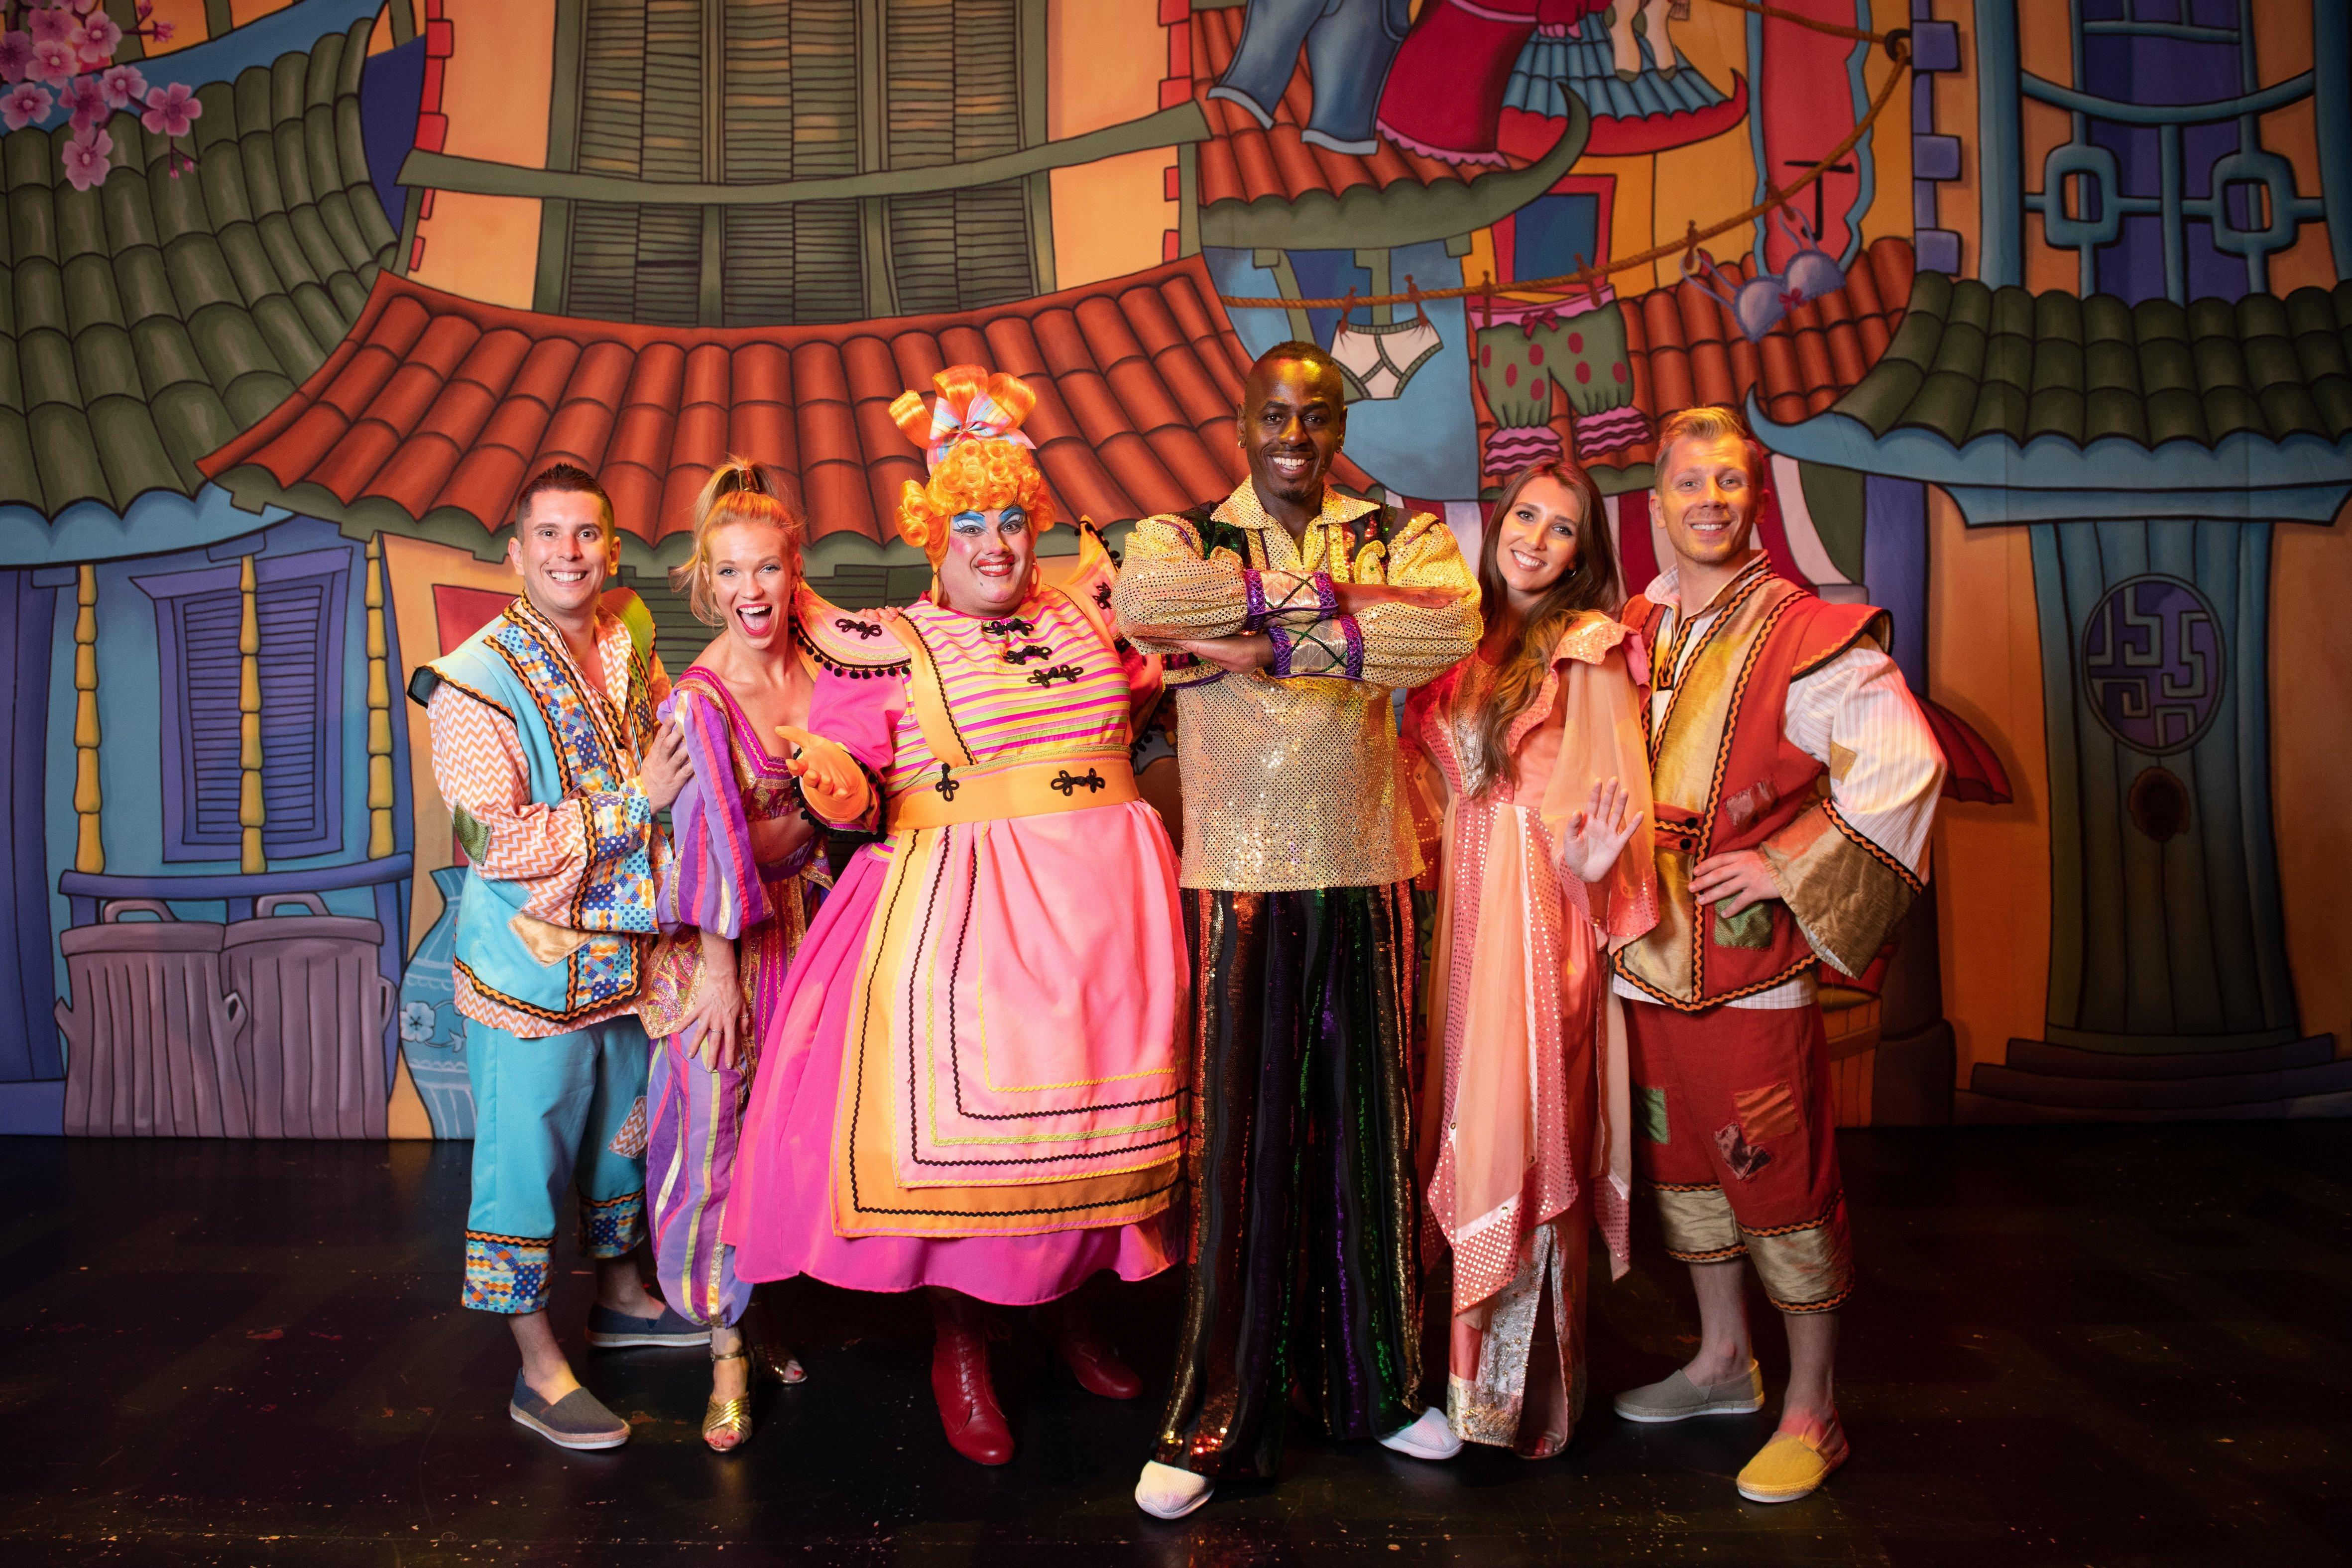 Further afield...... Aladdin is being performed at the Kings Theatre, Southsea, Portsmouth from December 11 2019 to January 5 2020. Andrew Searle Photography